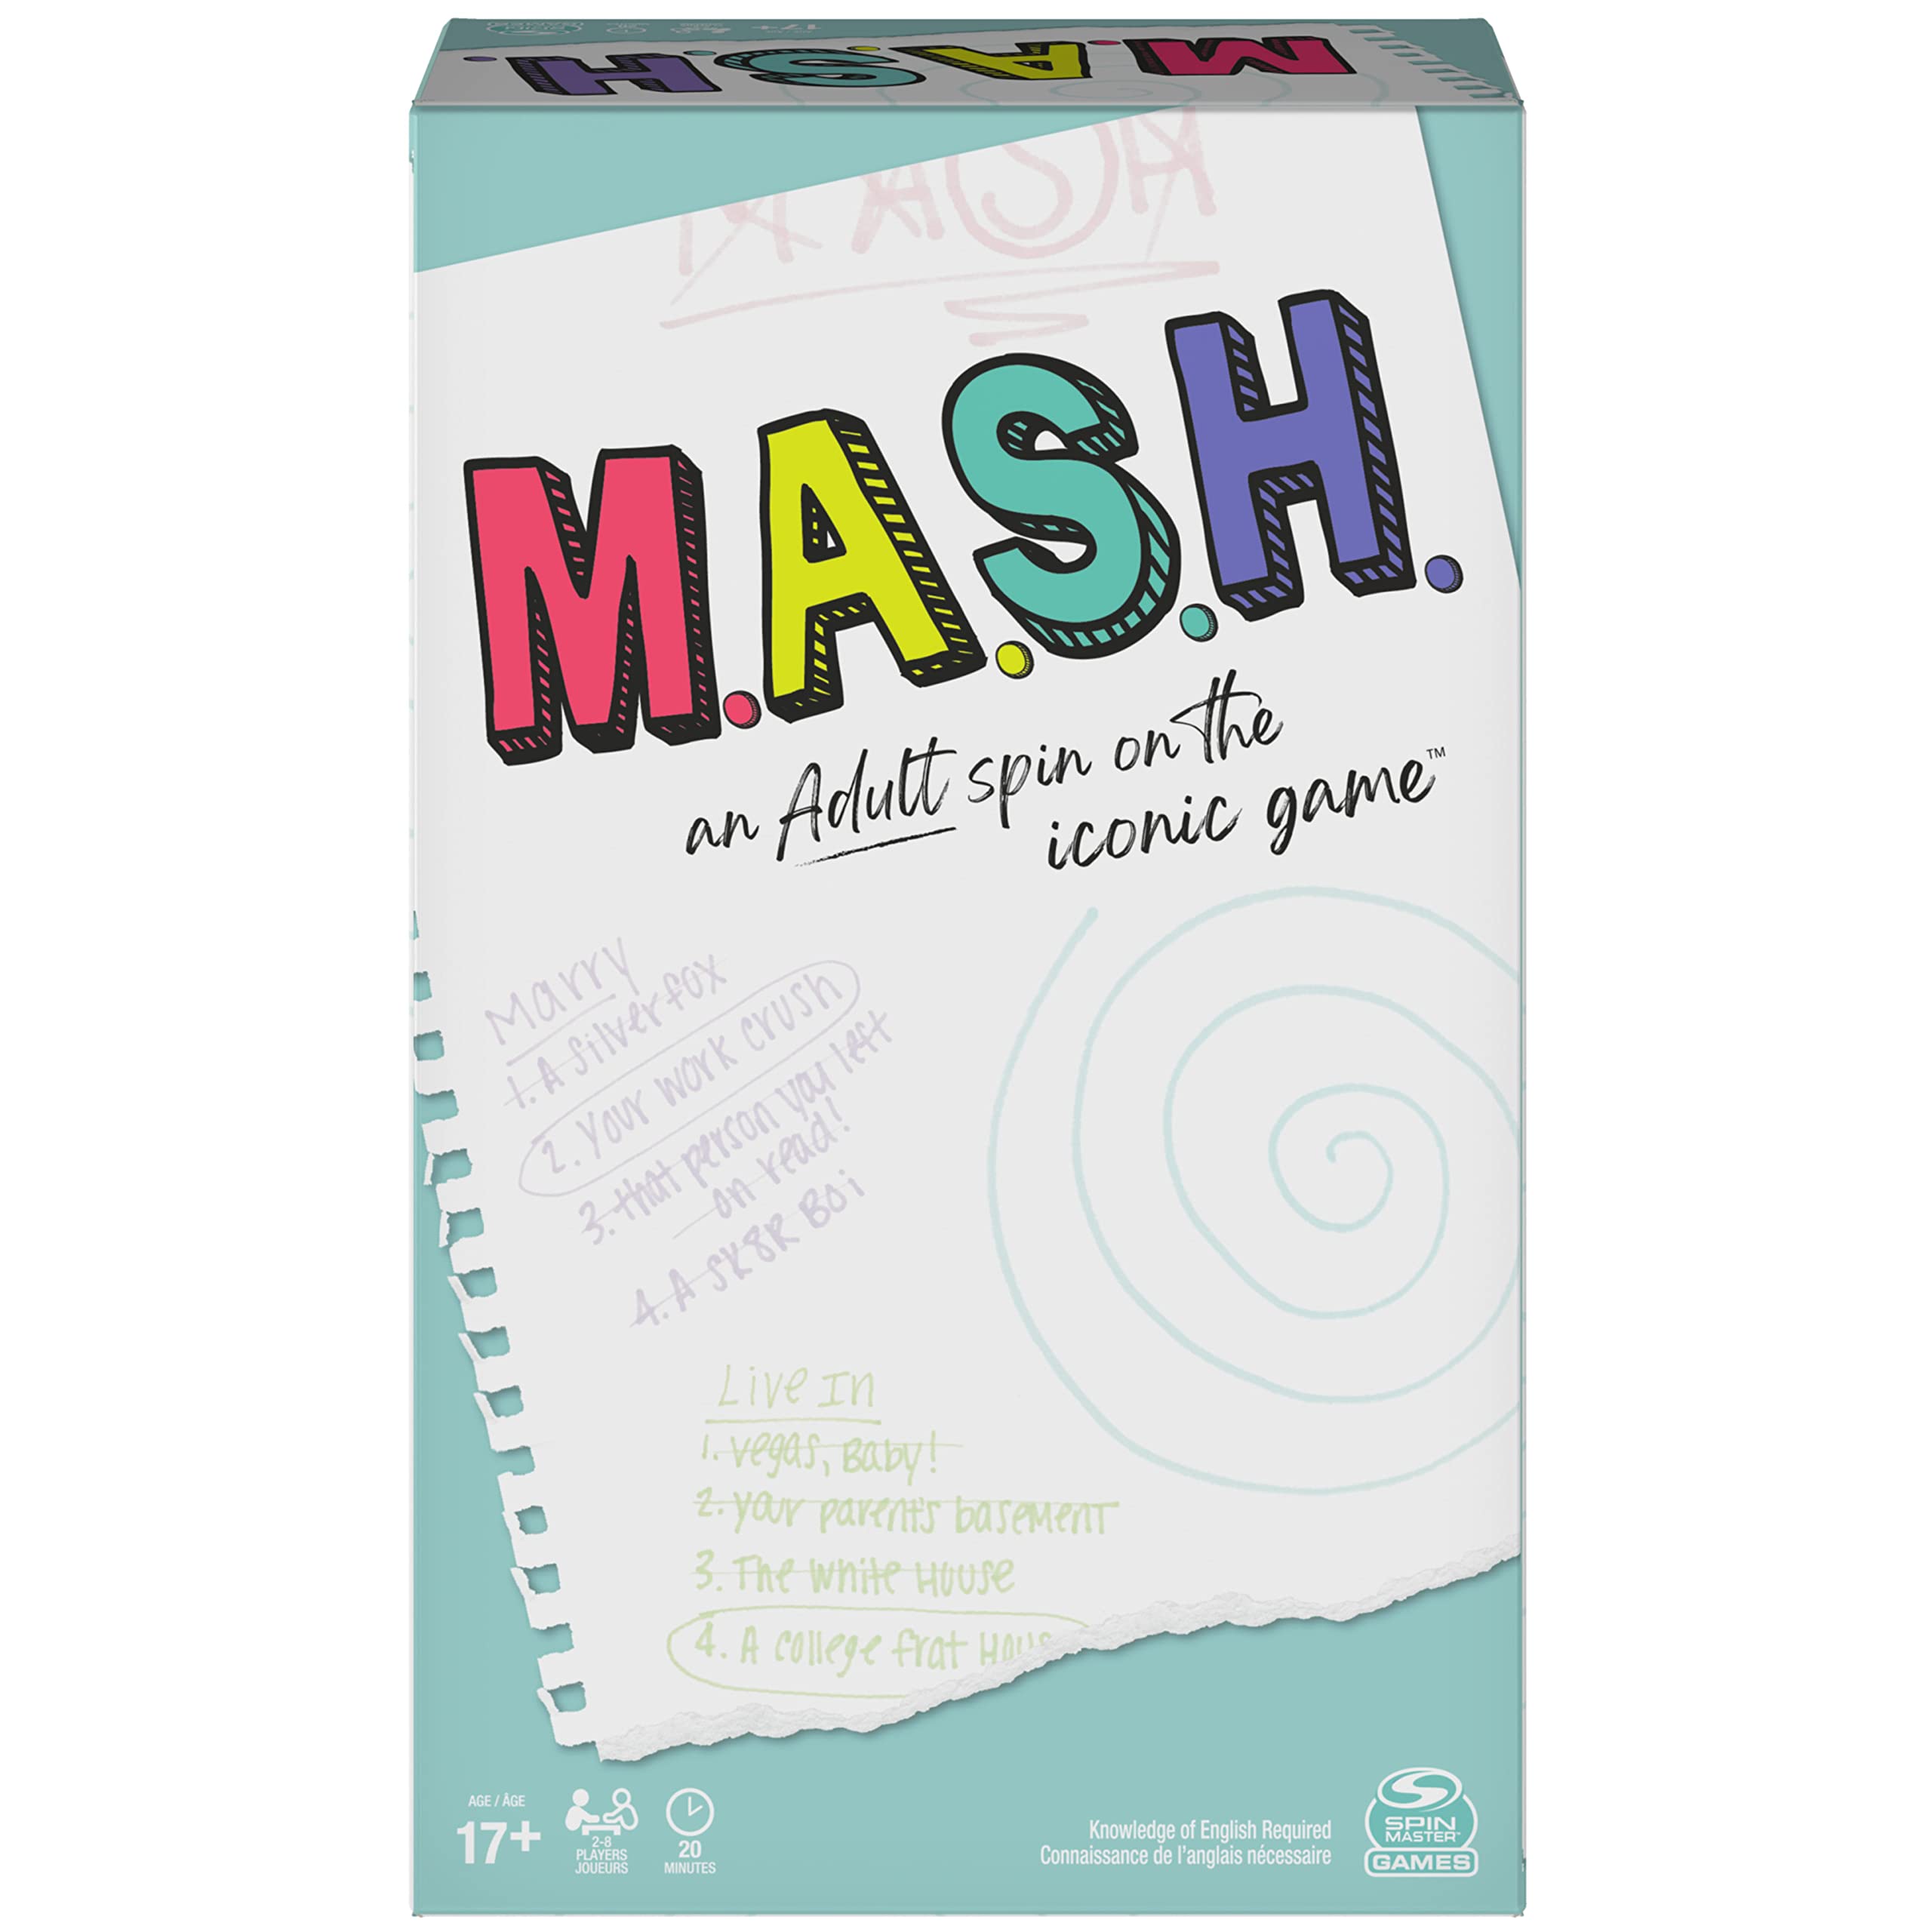 Spin Master Games MASH, Fortune Telling Adult Party Game, for Ages 17 and up